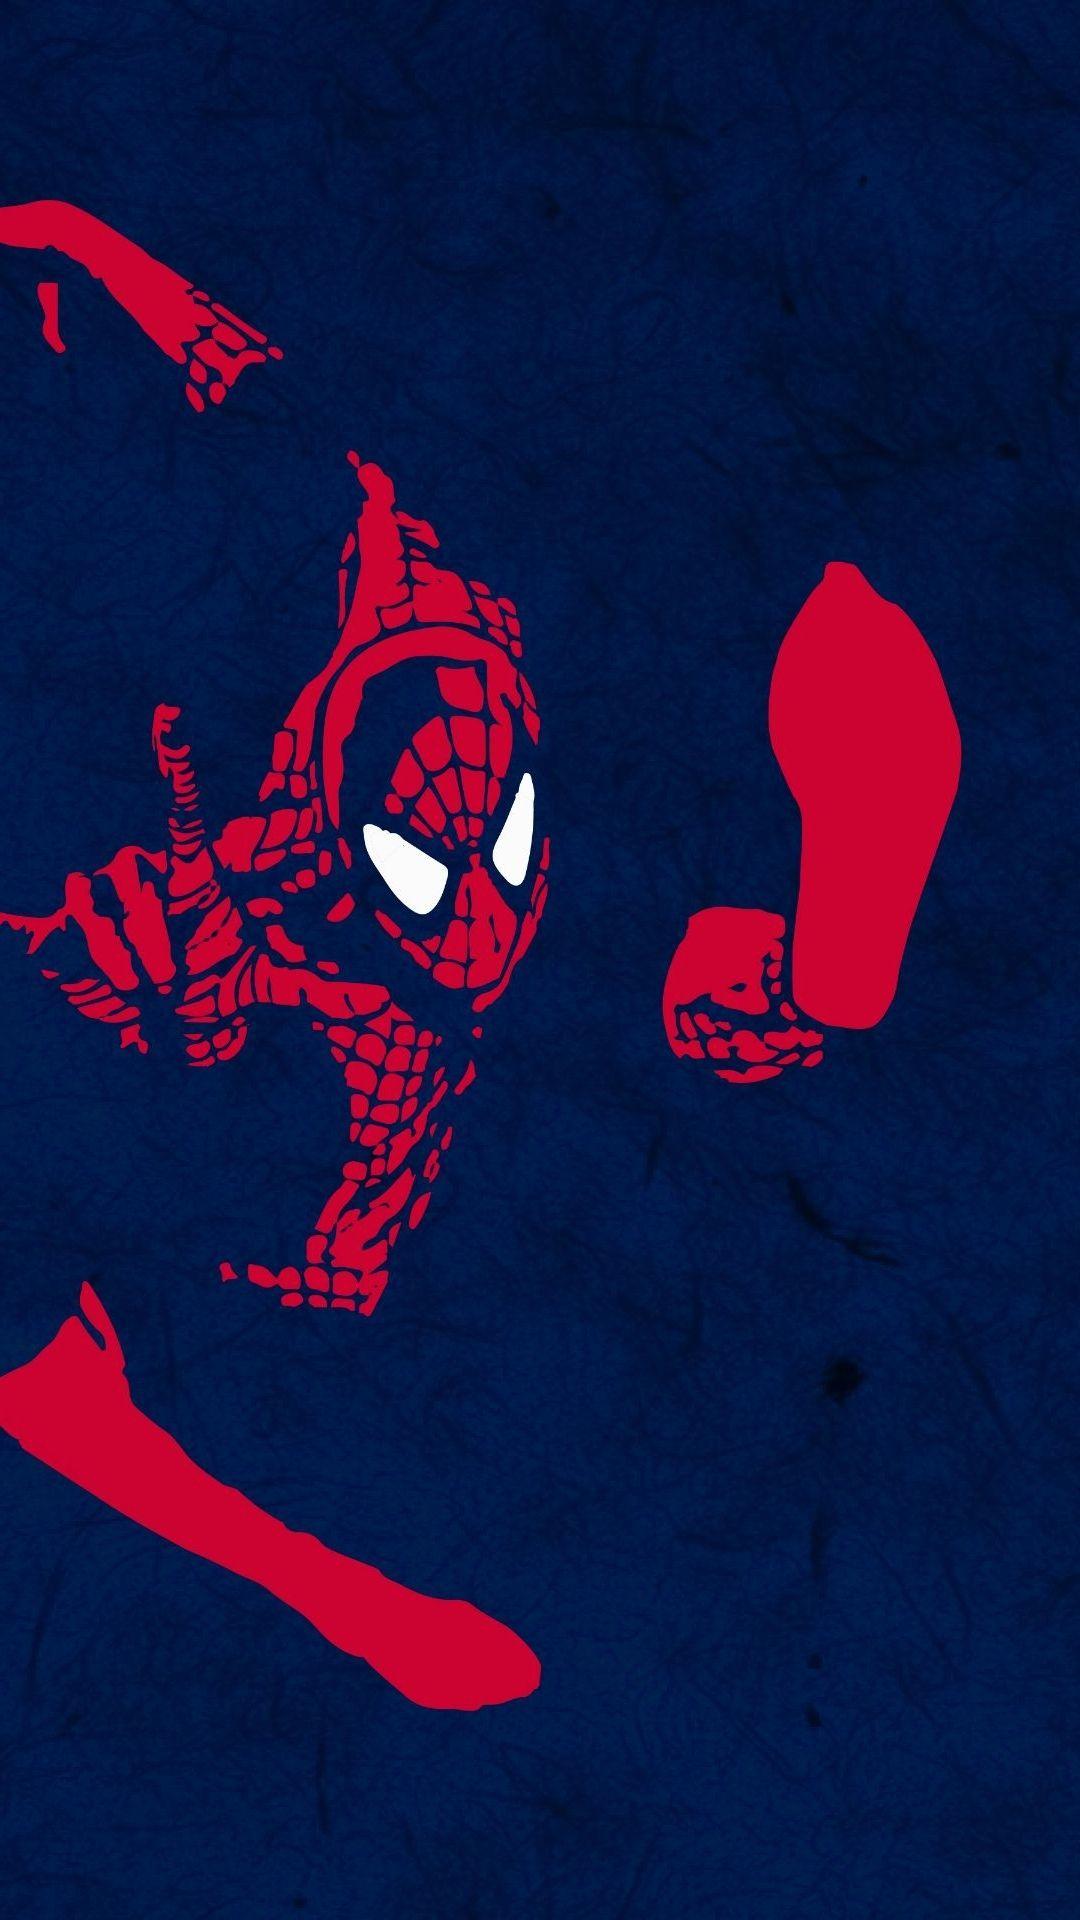 Wallpaper.wiki Spiderman Background For IPhone PIC WPD005057